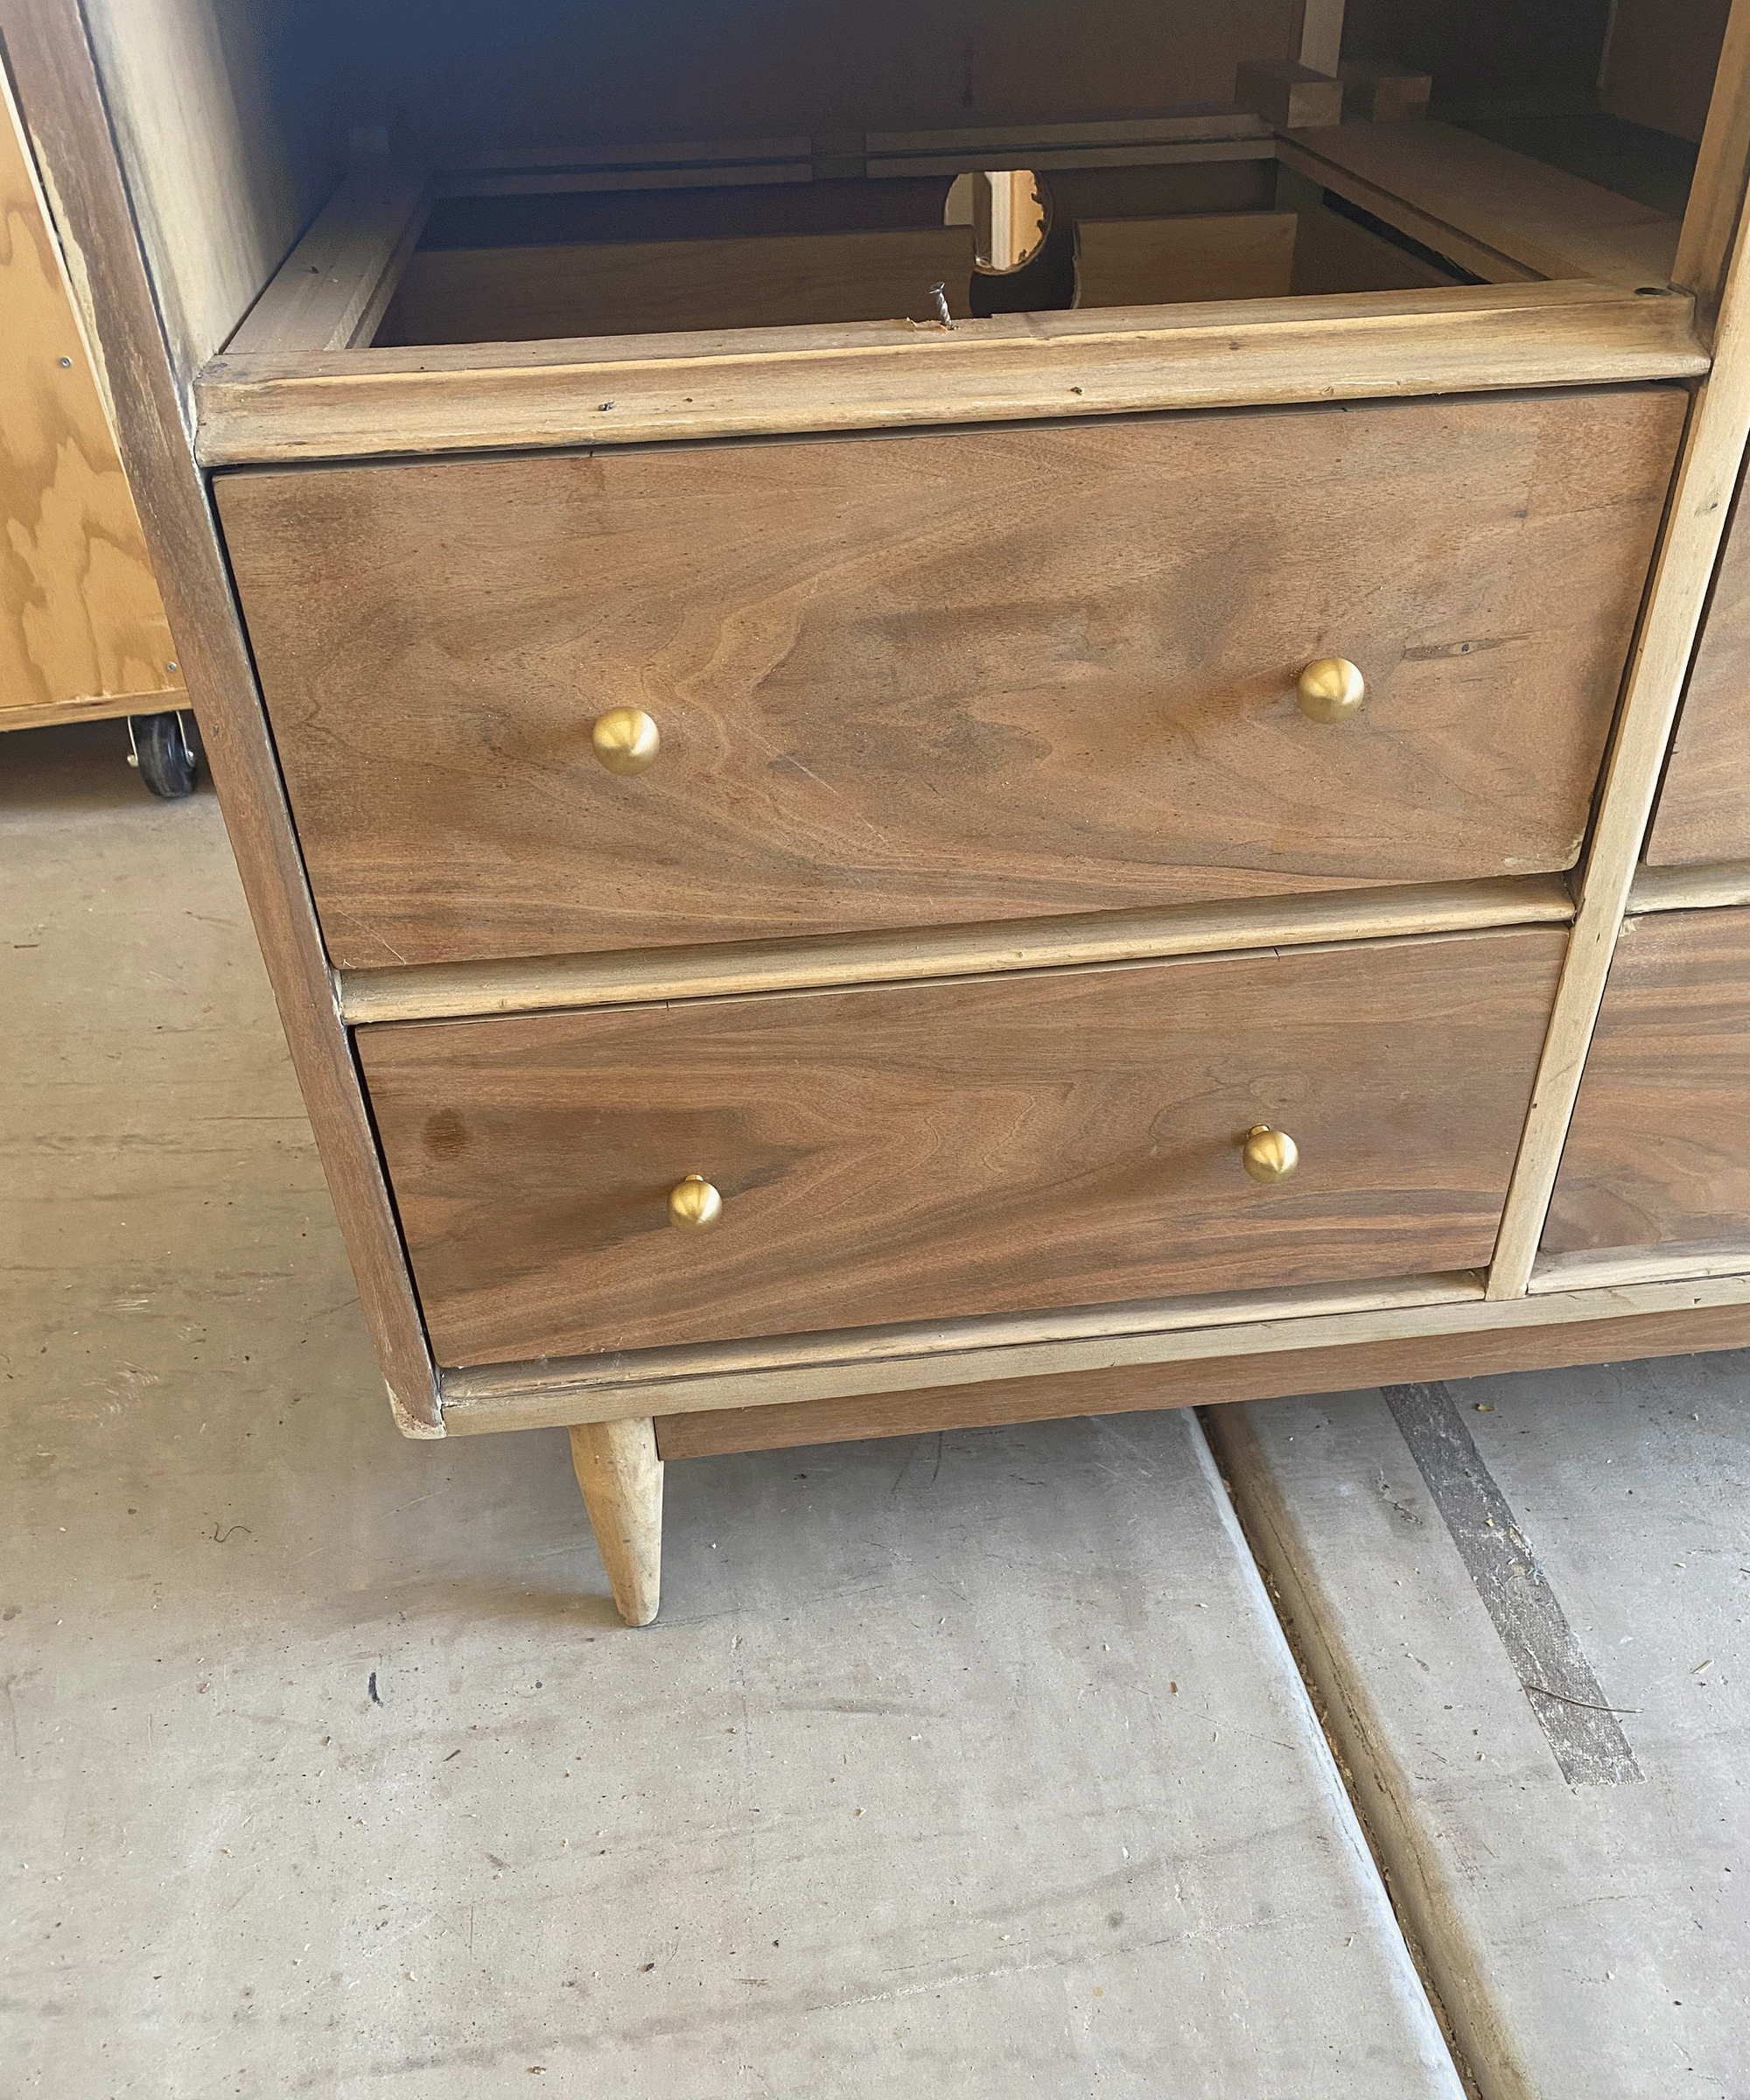 Close up of wooden dresser vanity with brass knob handle decor